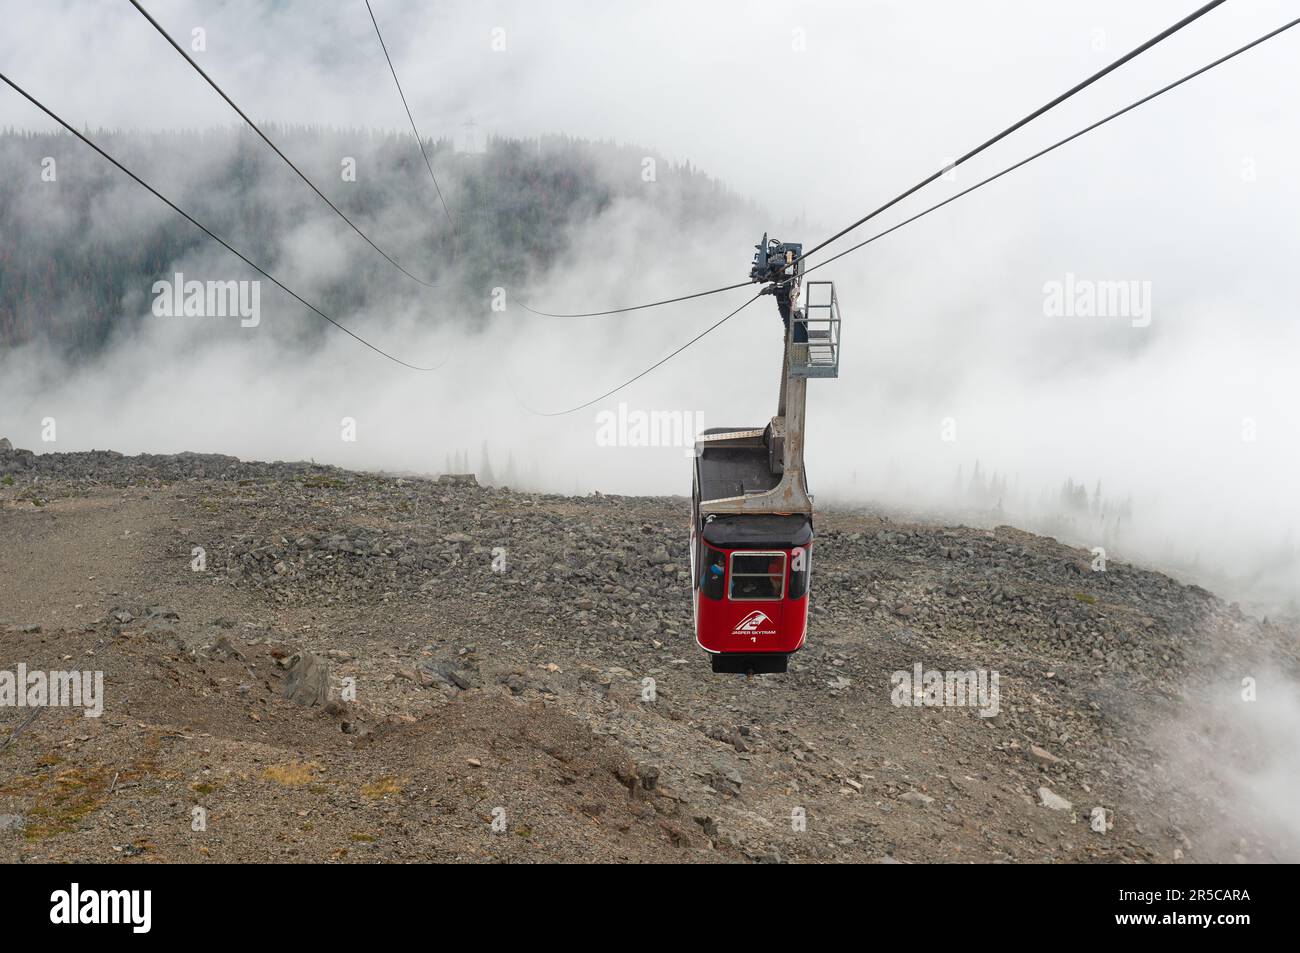 Cable car of the Jasper Skytram rising up through the mist to Mount Whistlers Mountain, Jasper national park, Canada Stock Photo